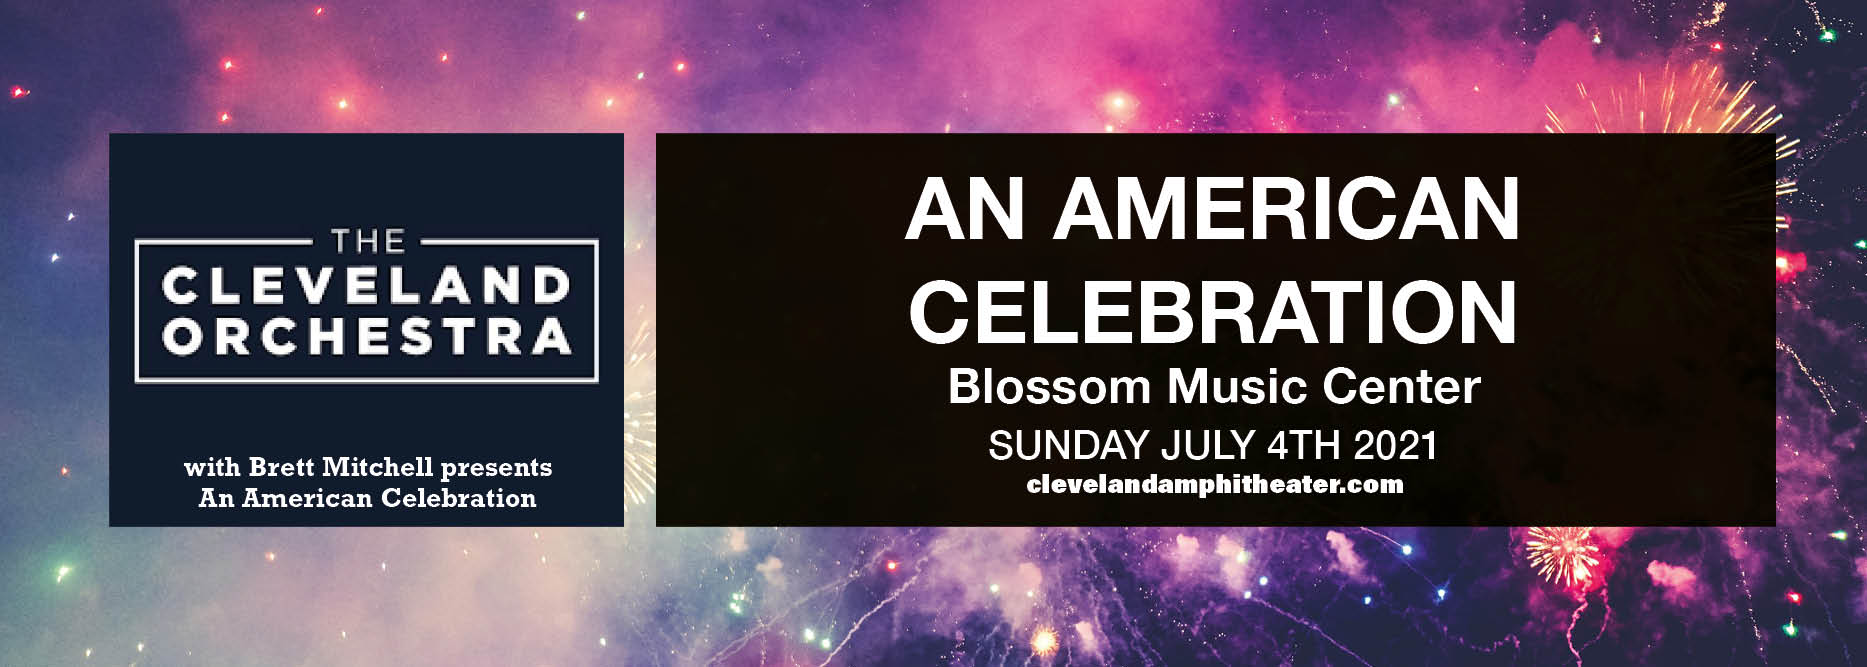 The Cleveland Orchestra: Brett Mitchell - An American Celebration at Blossom Music Center